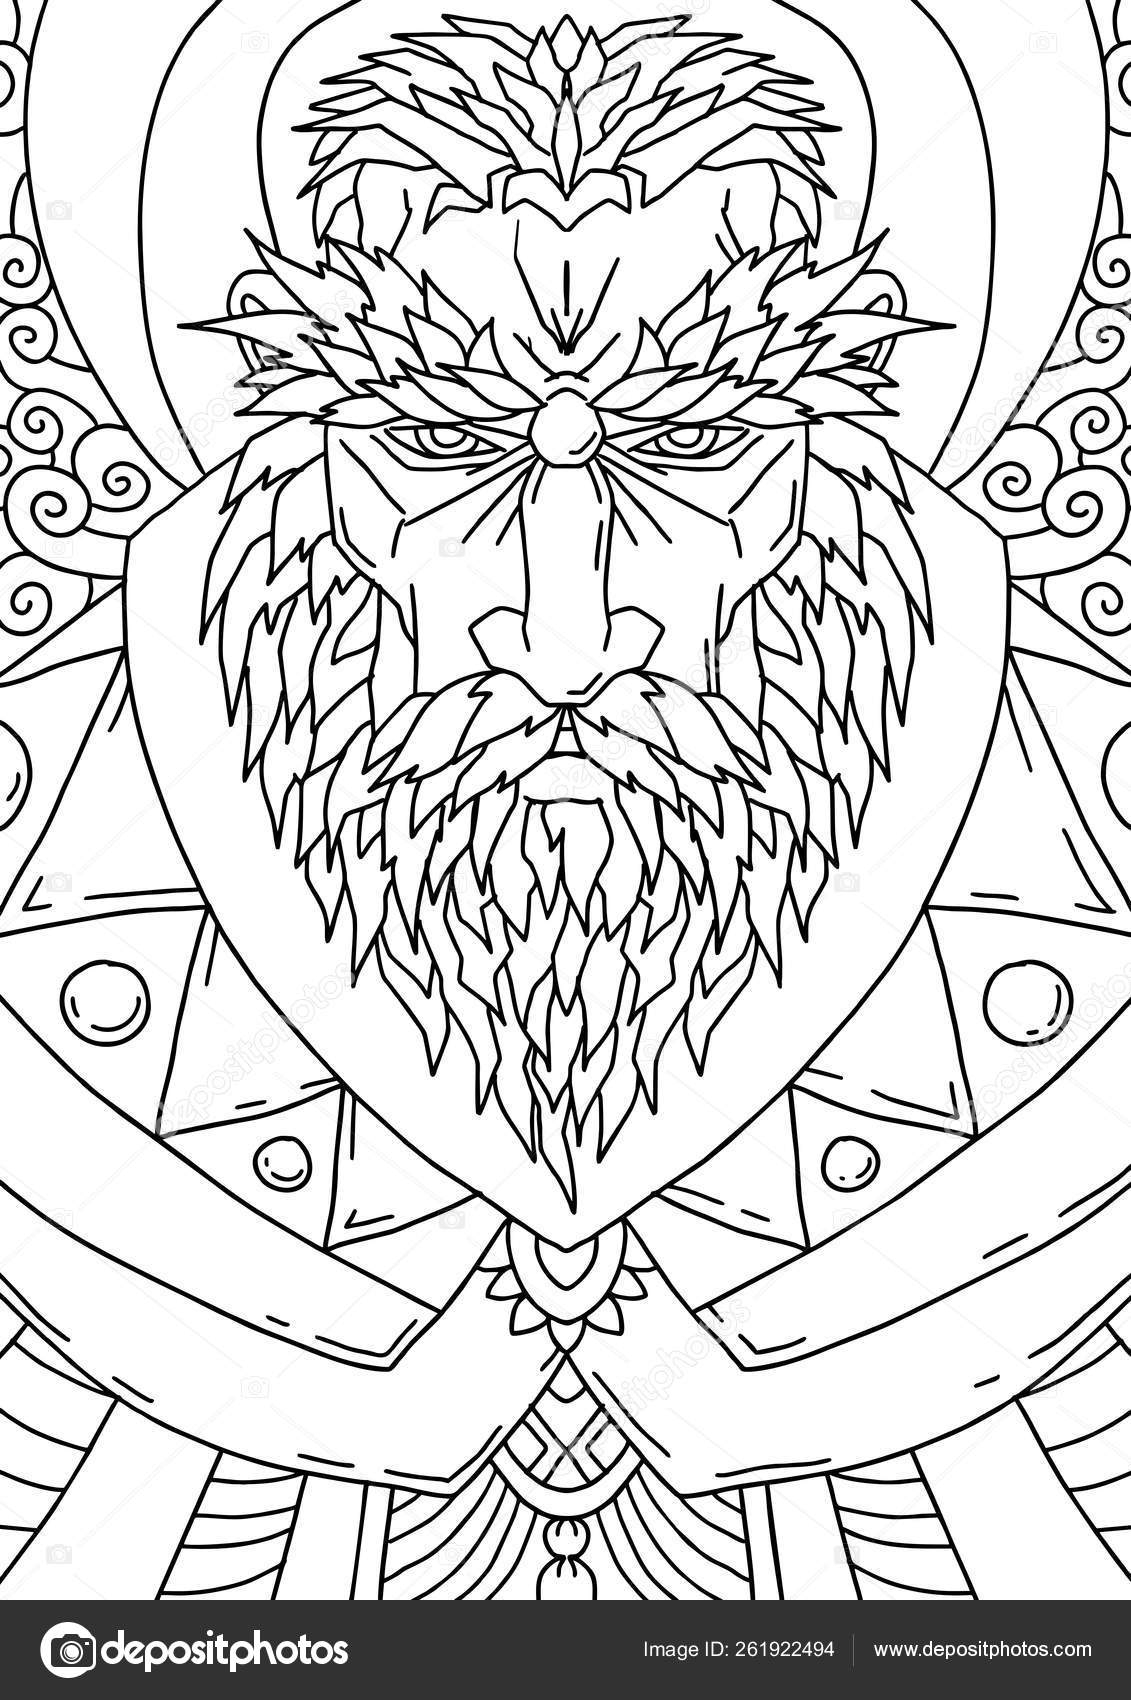 Art Coloring Pages For Adults Bearded Man With Mustache For Adult Coloring Pages Tattoo Art